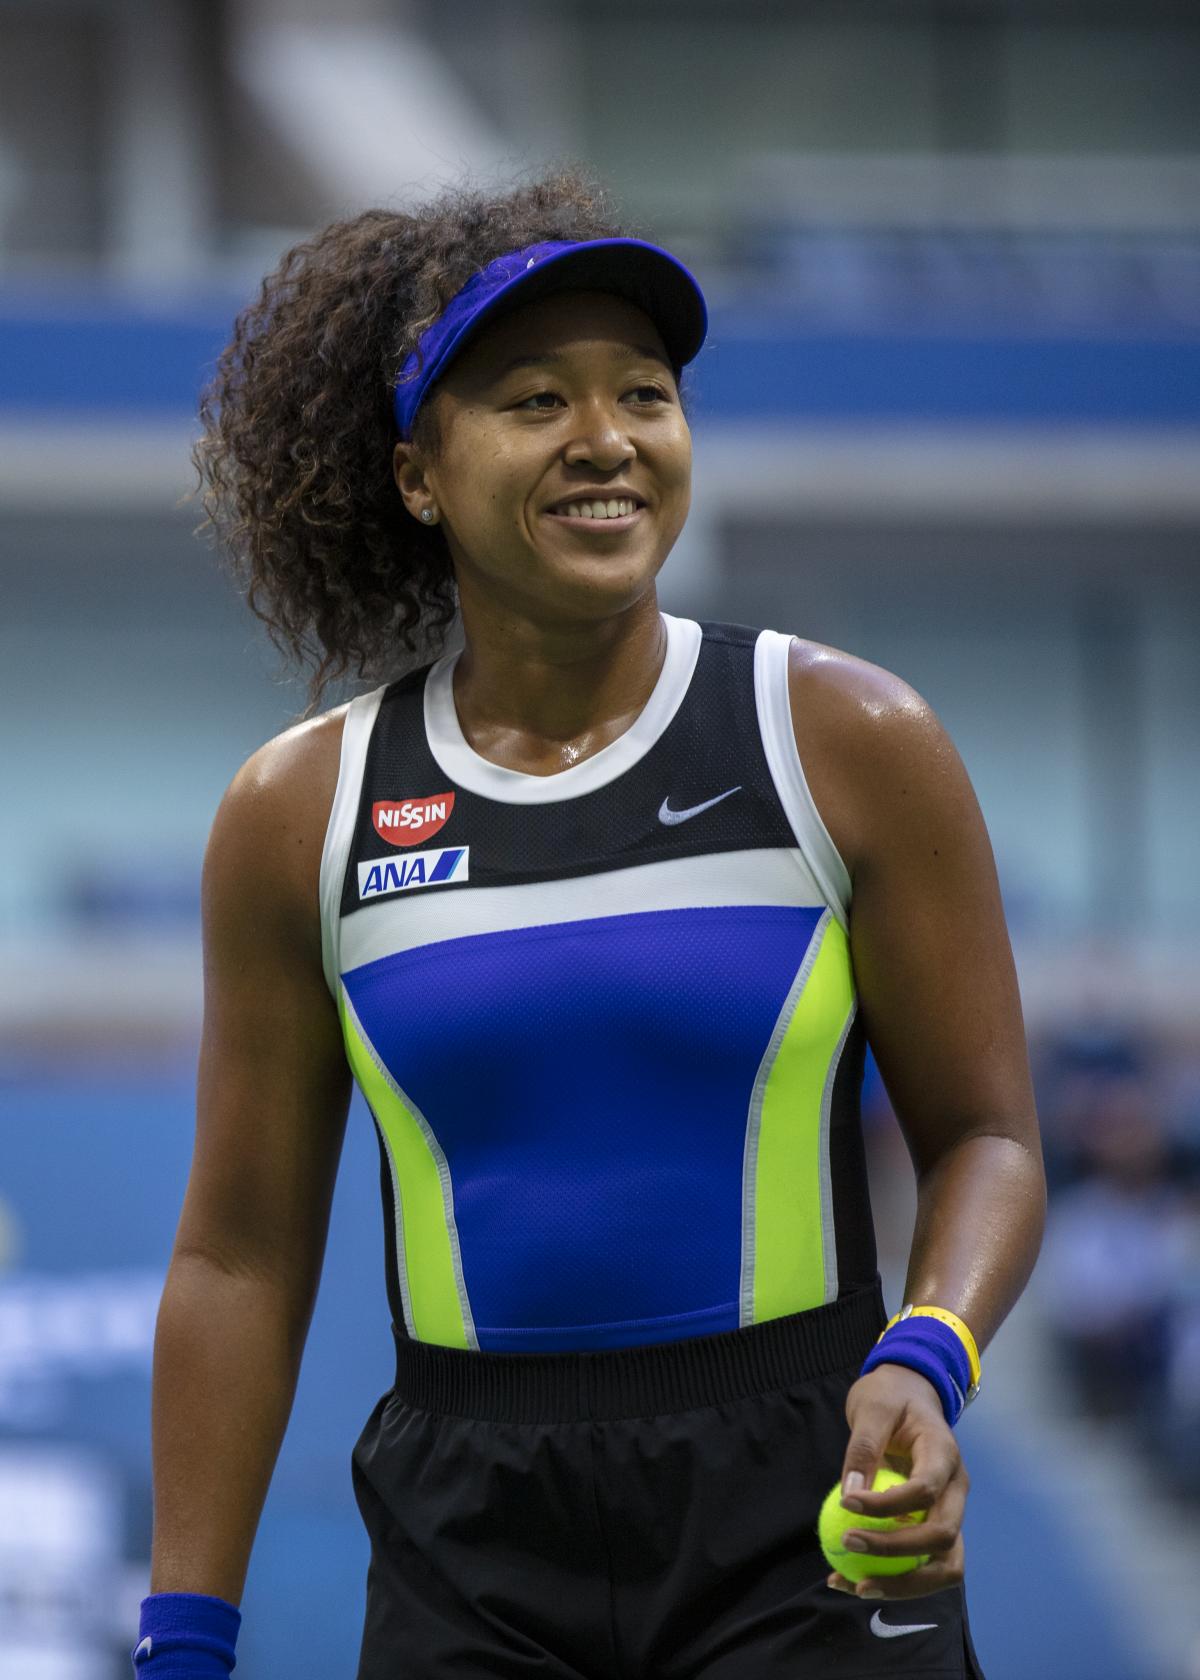 Naomi Osaka - Celebrity biography, zodiac sign and famous quotes